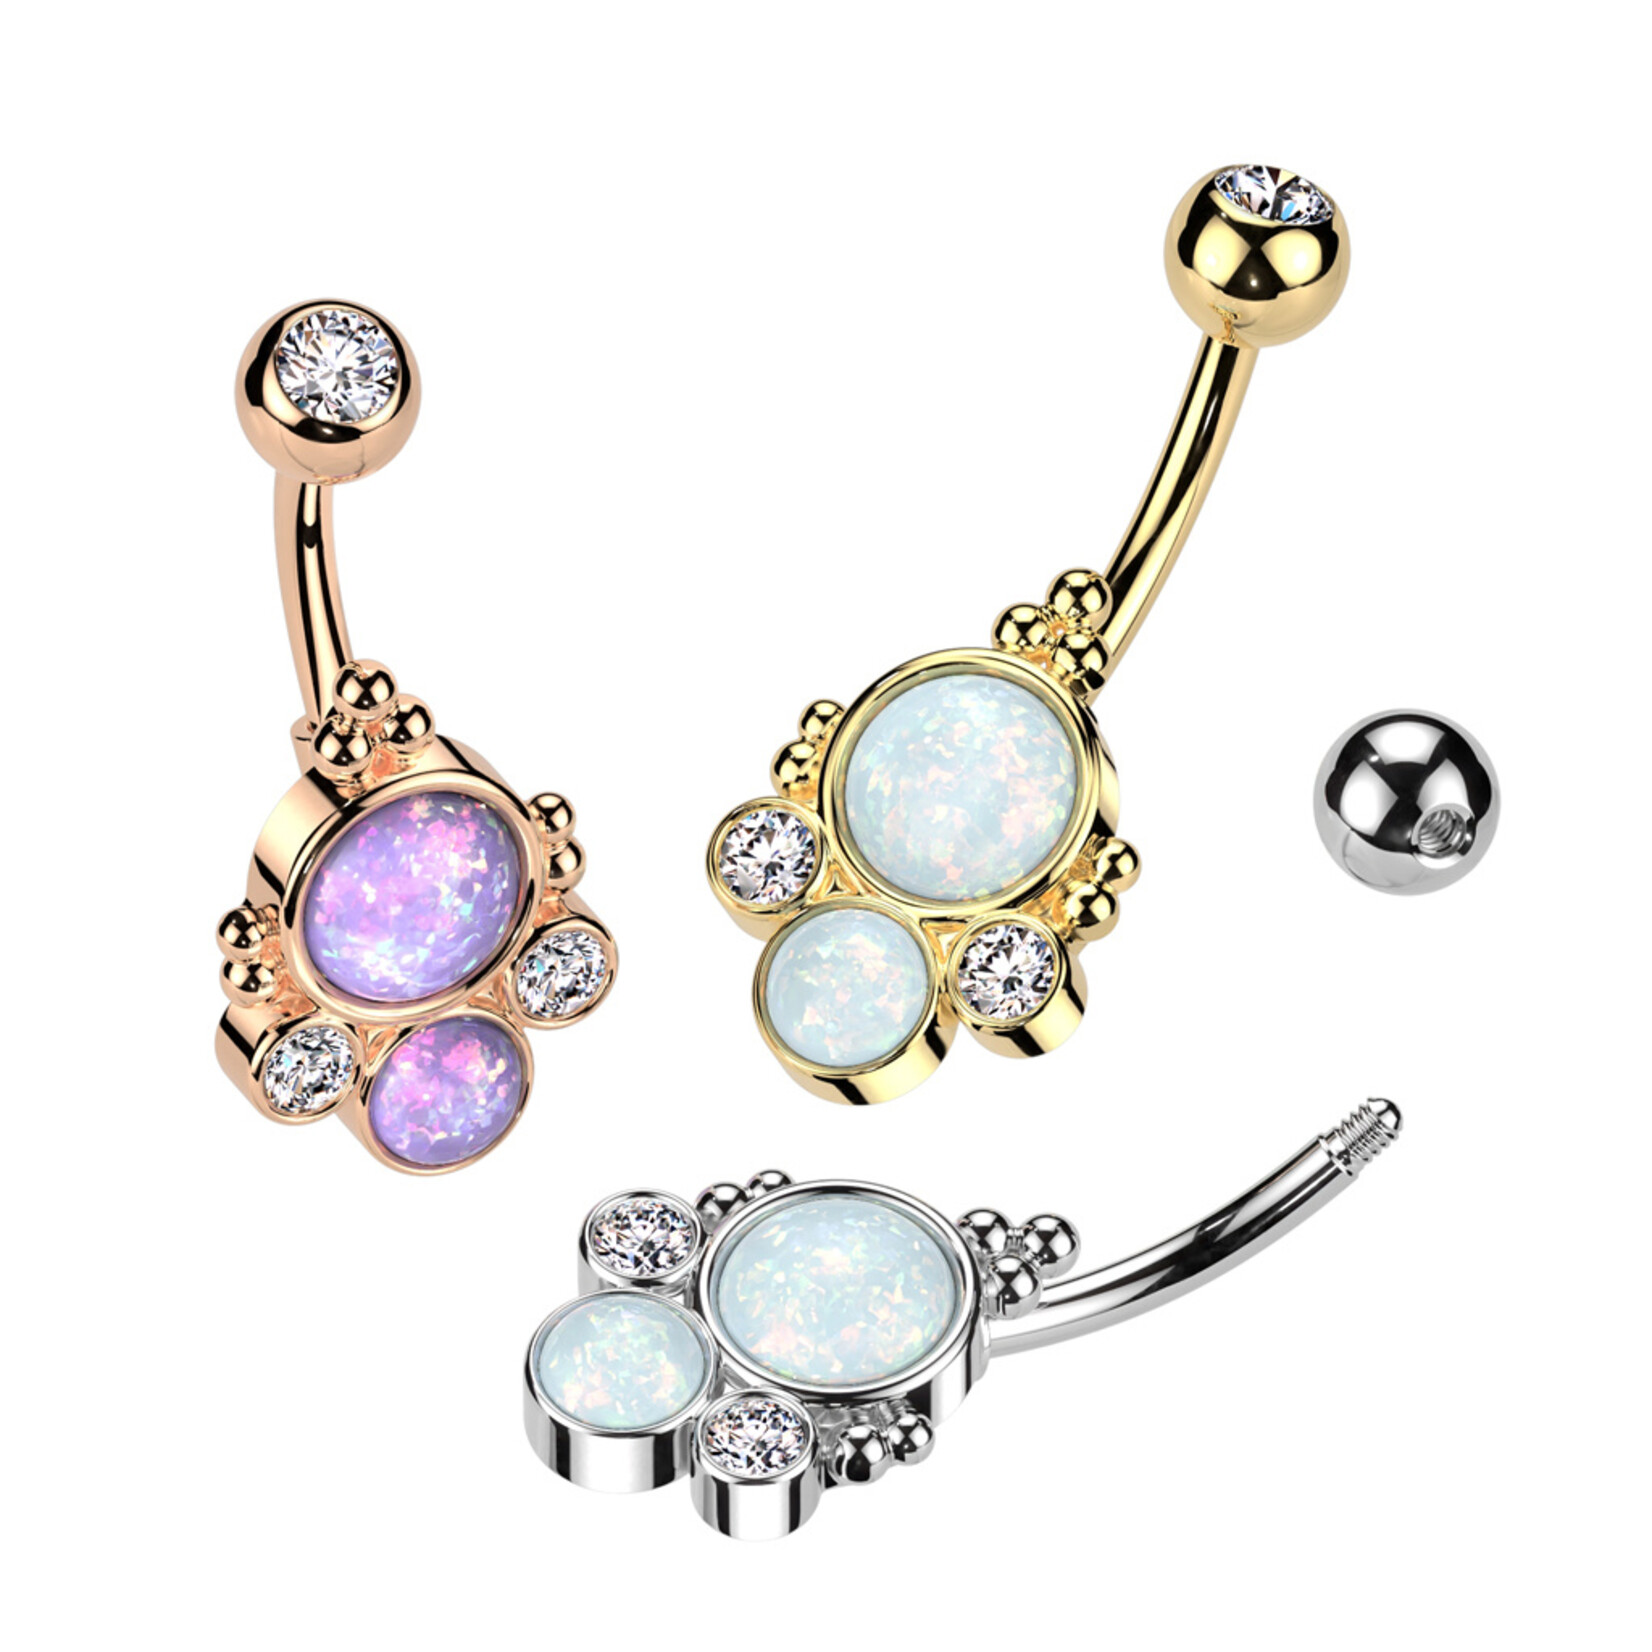 Hollywood Body Jewelry Opal & Crystal Navel Ring